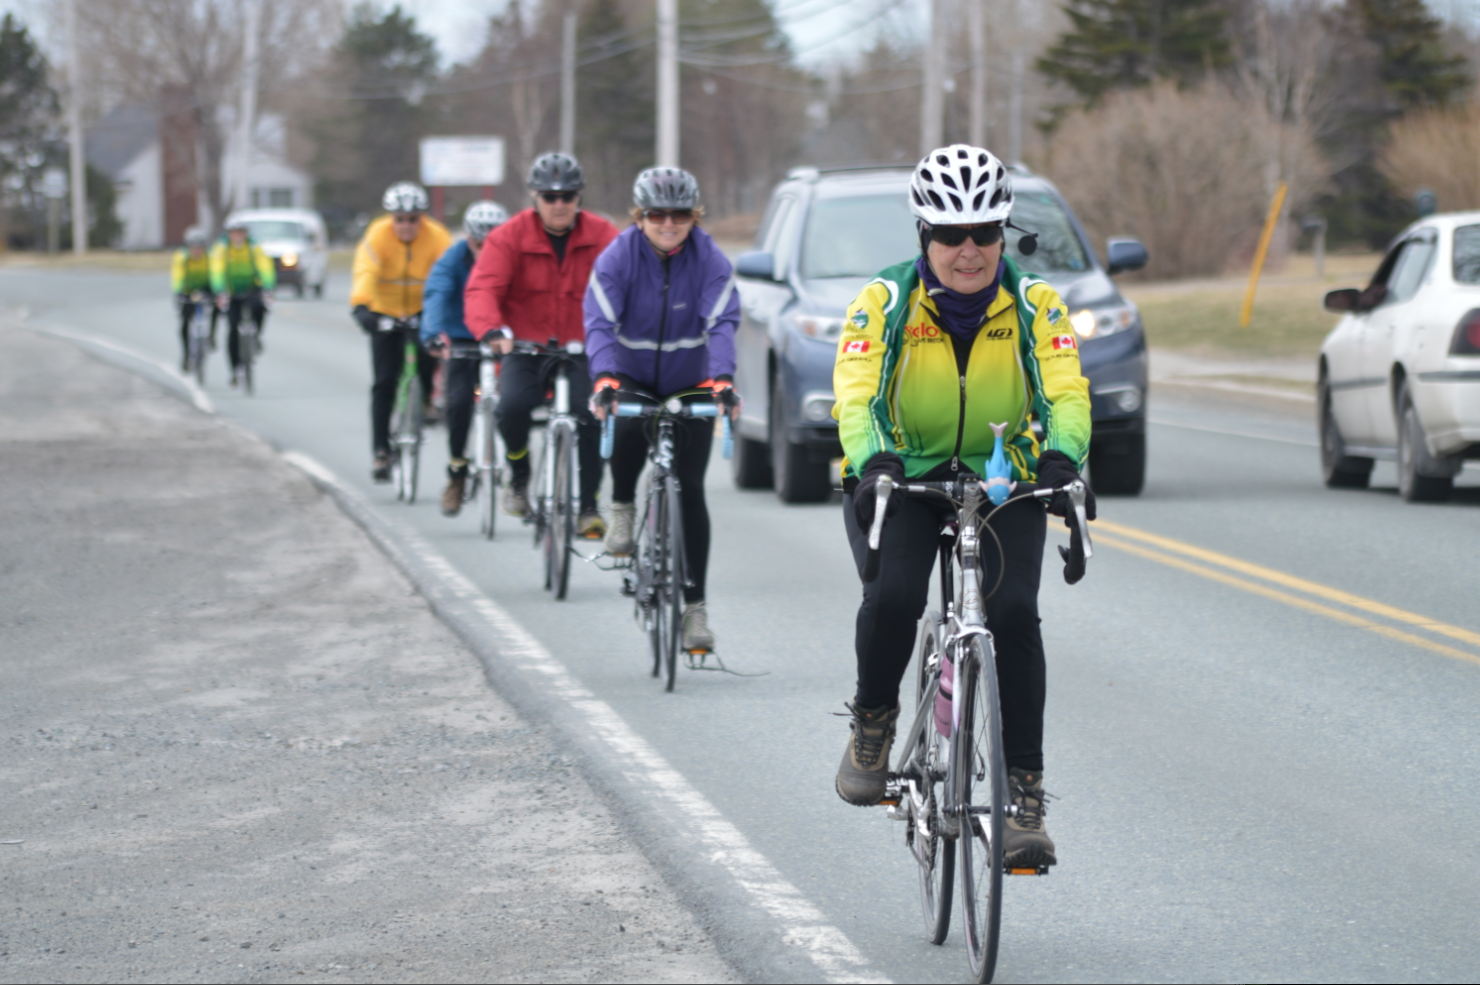 OPP remind cyclists and motorists about road safety